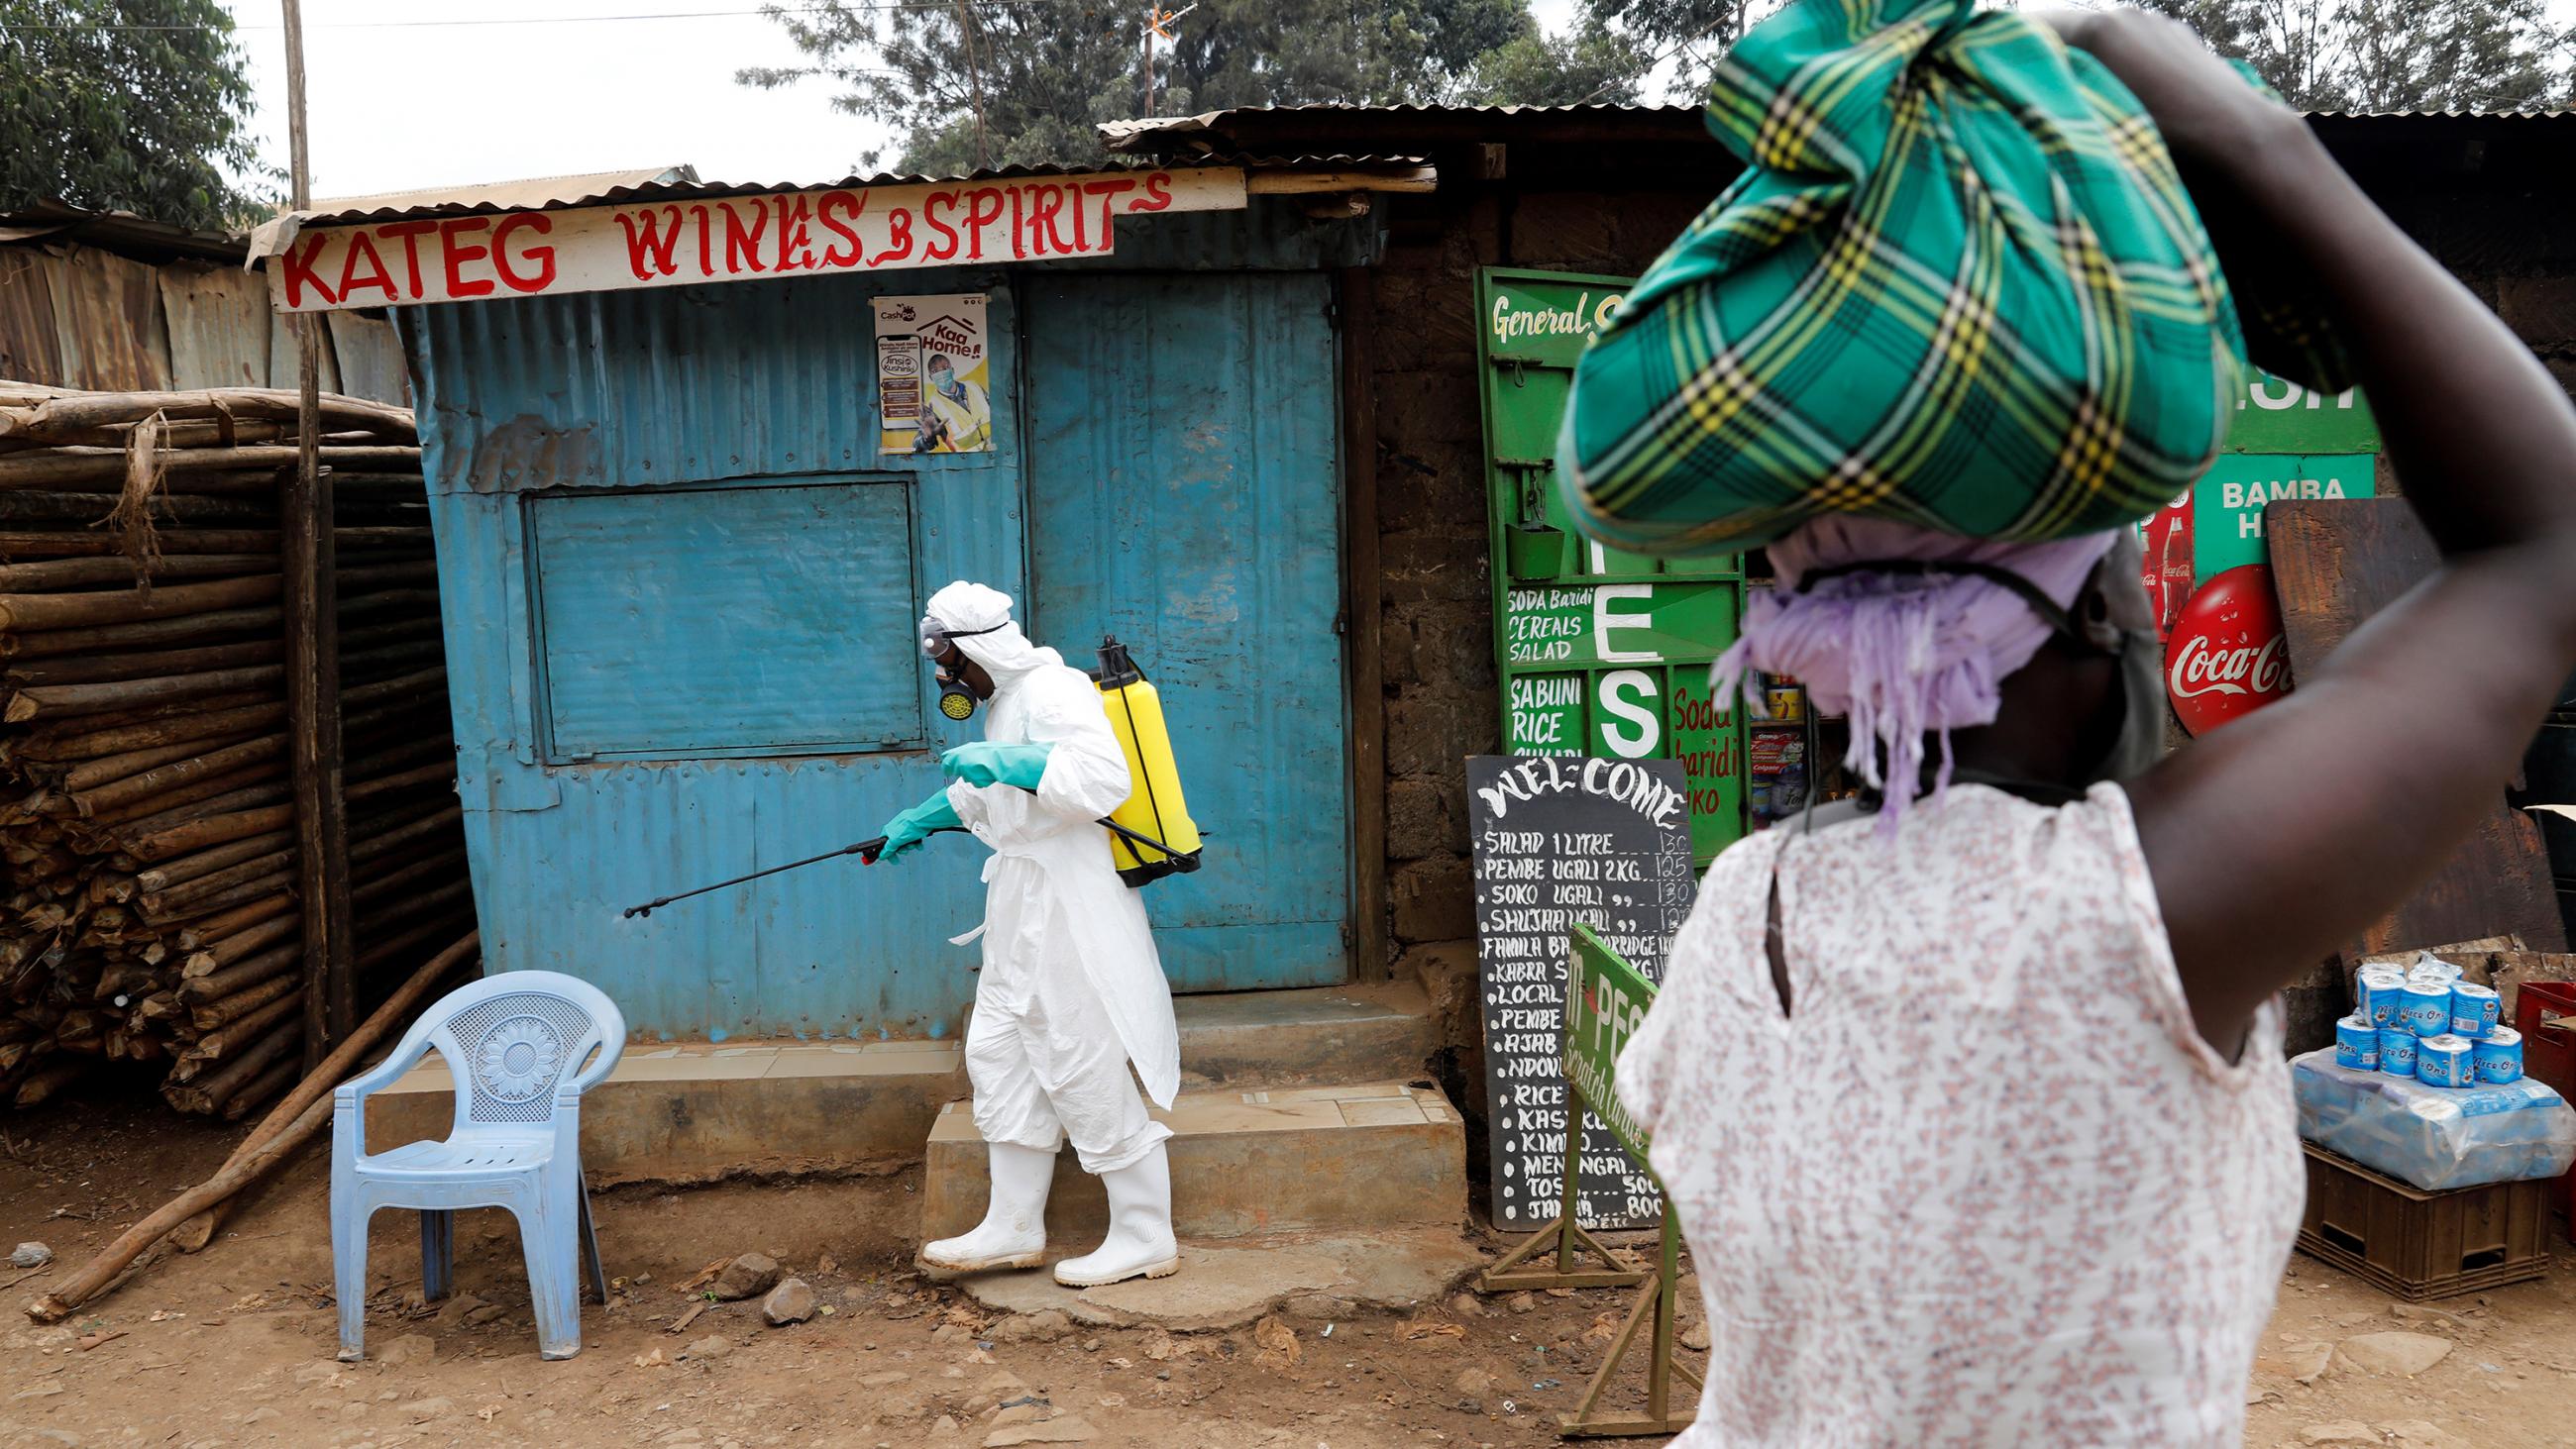 The photo shows a health worker in protective gear spraying from a bottle while a woman in the foreground looks on. 